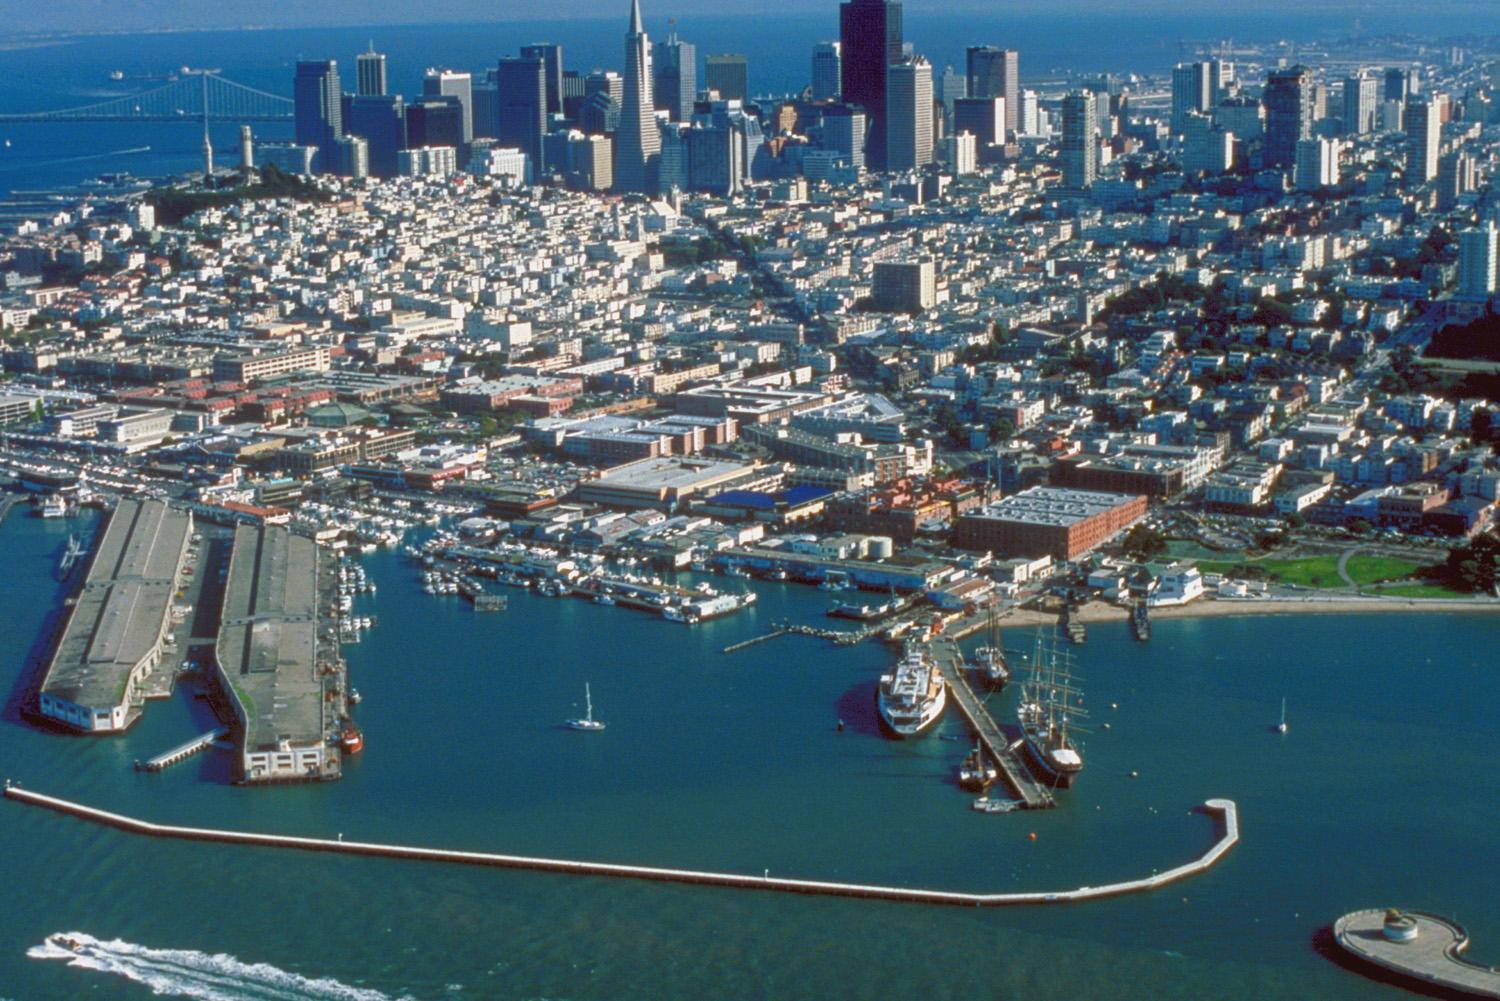 Fishermans Wharf Aerial City View Picture